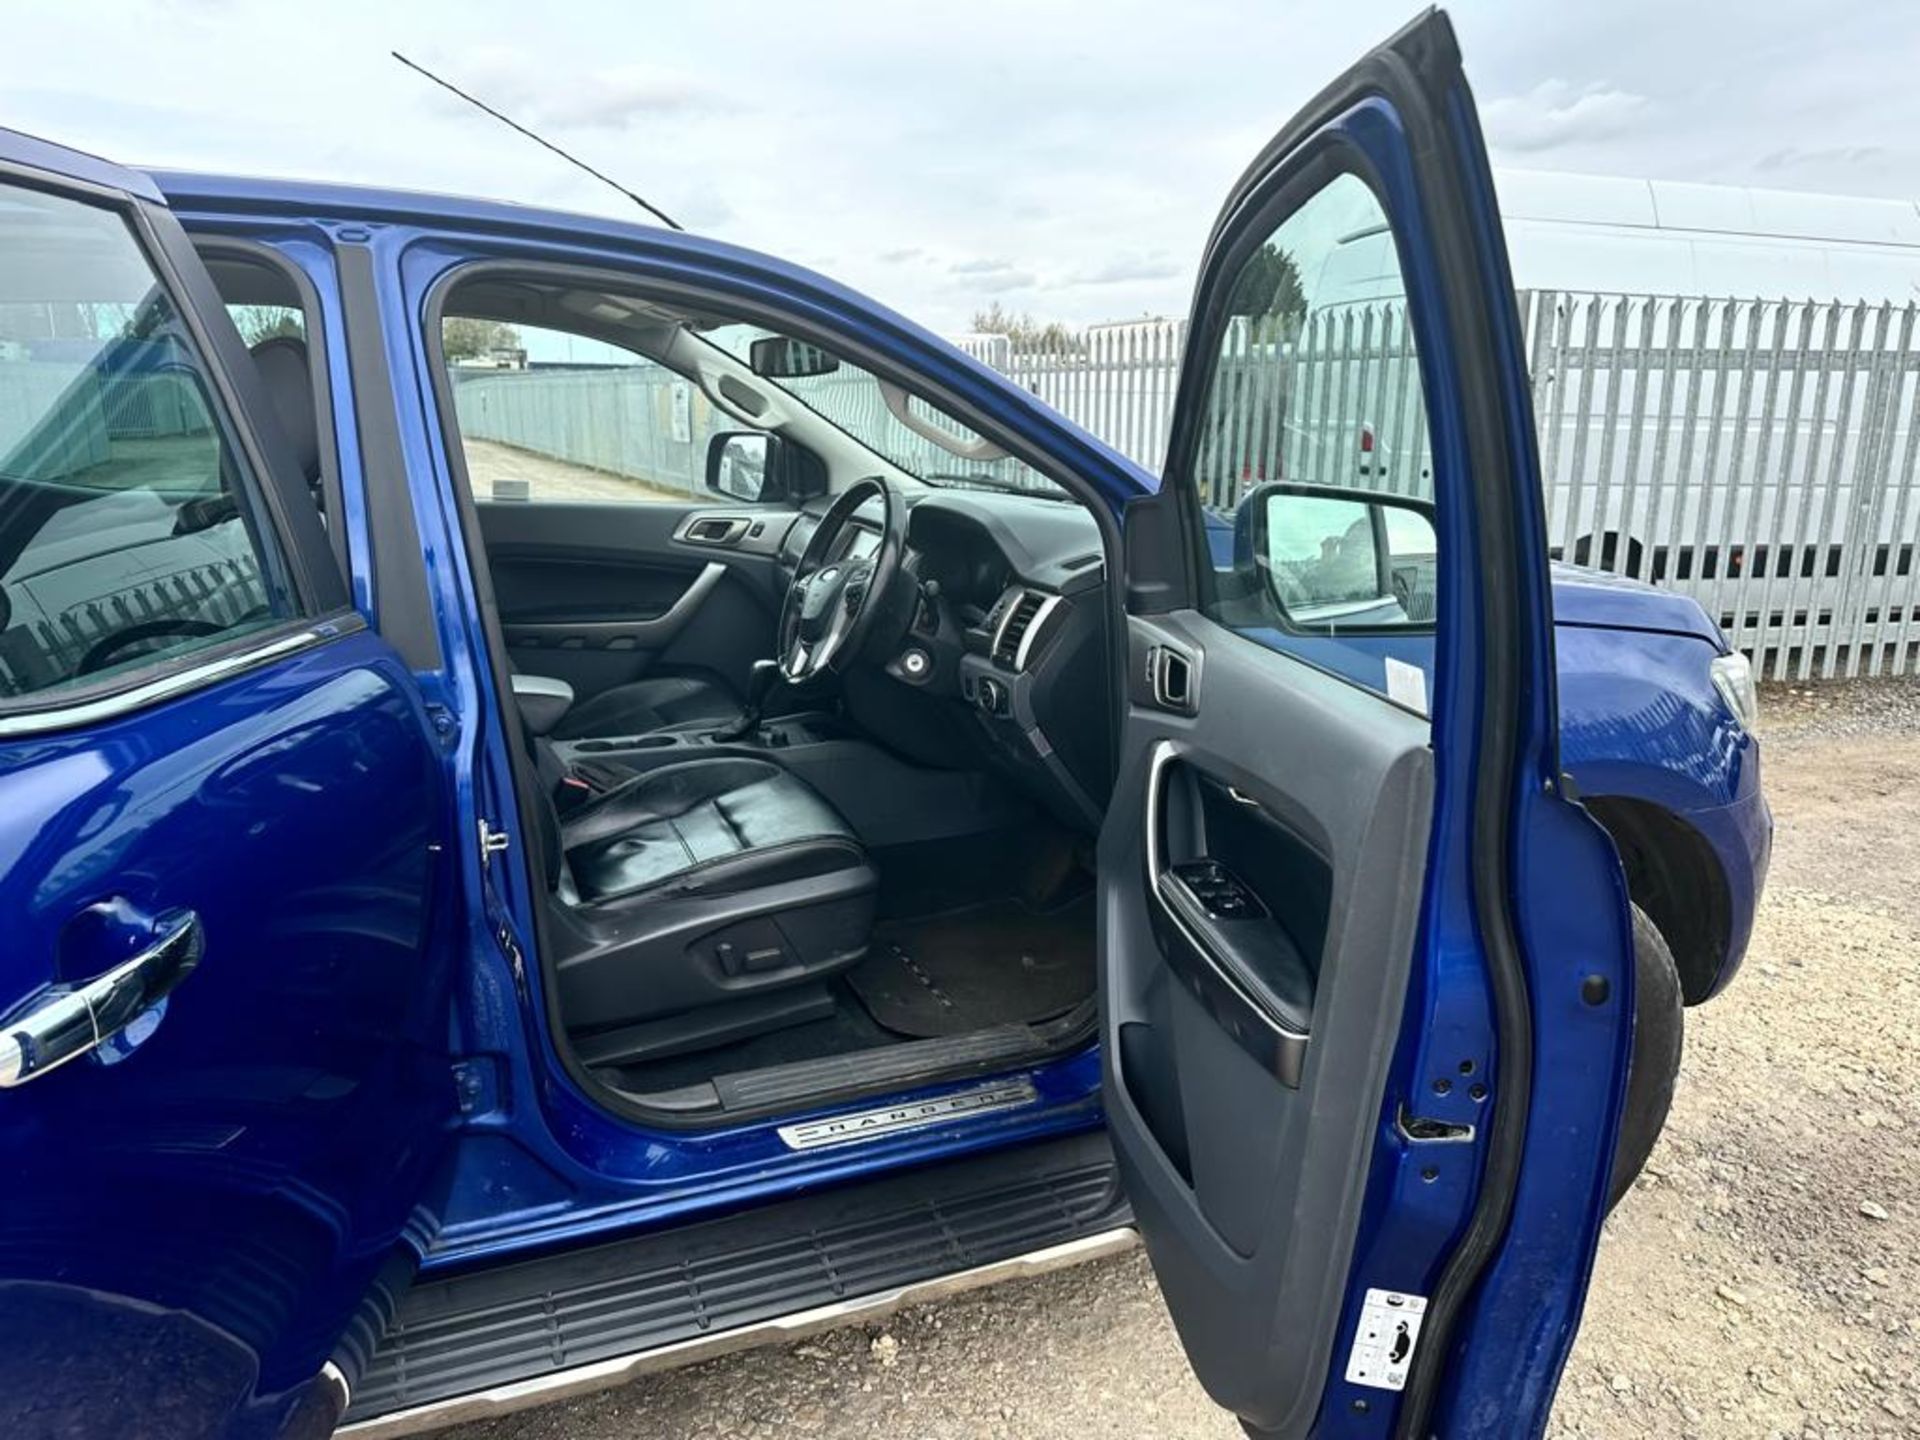 ** ON SALE ** Ford Ranger Limited DCI TDCI 160 4X4 2016 '16 Reg'-Automatic - A/C - -Bluetooth-No Vat - Image 14 of 38